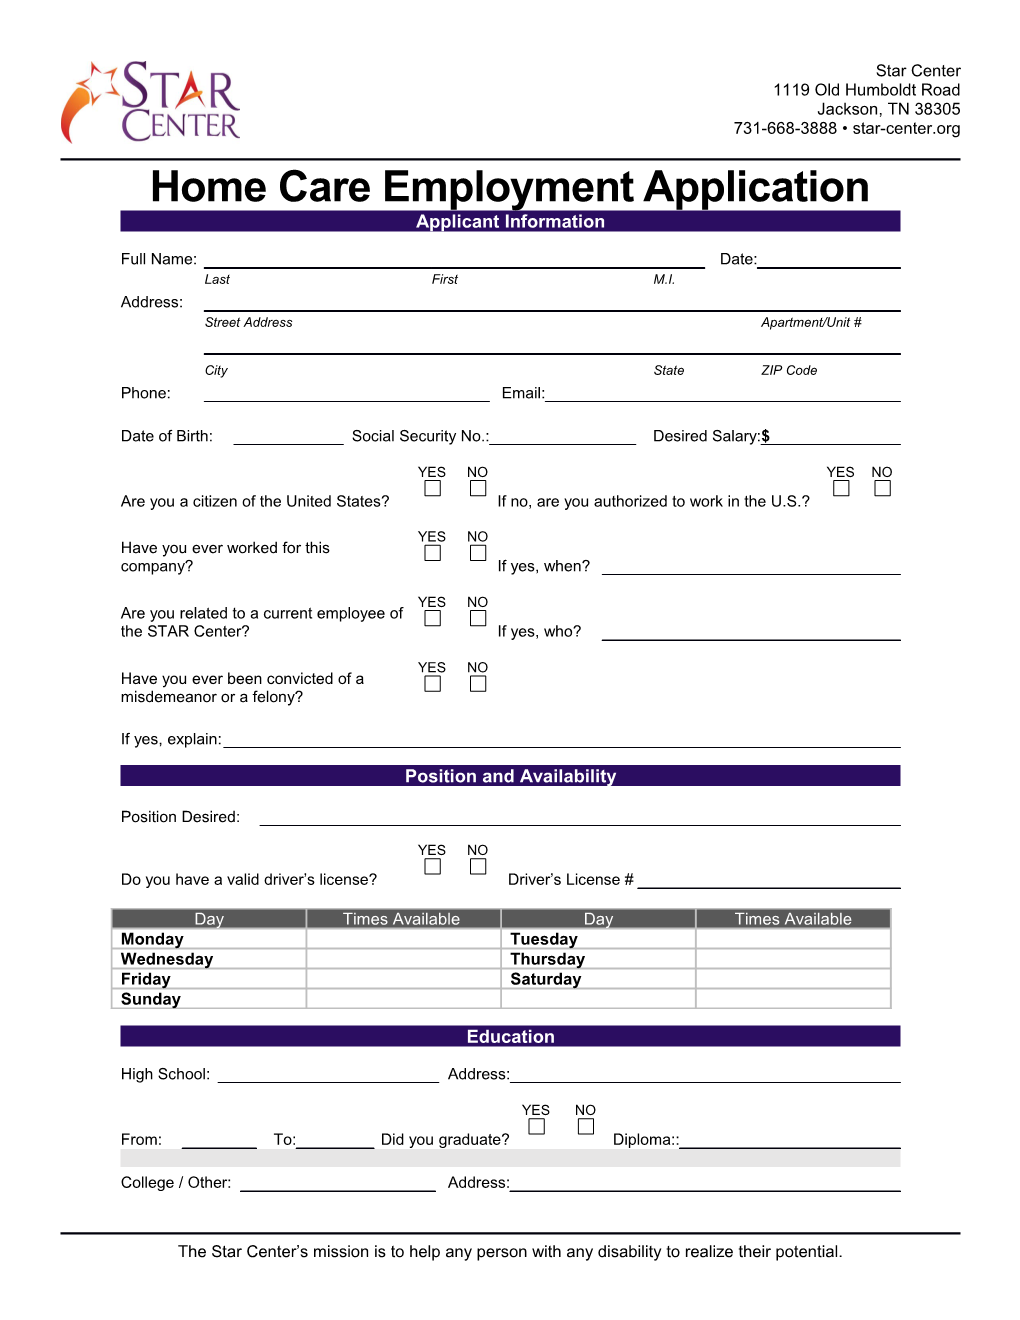 Home Care Employment Application